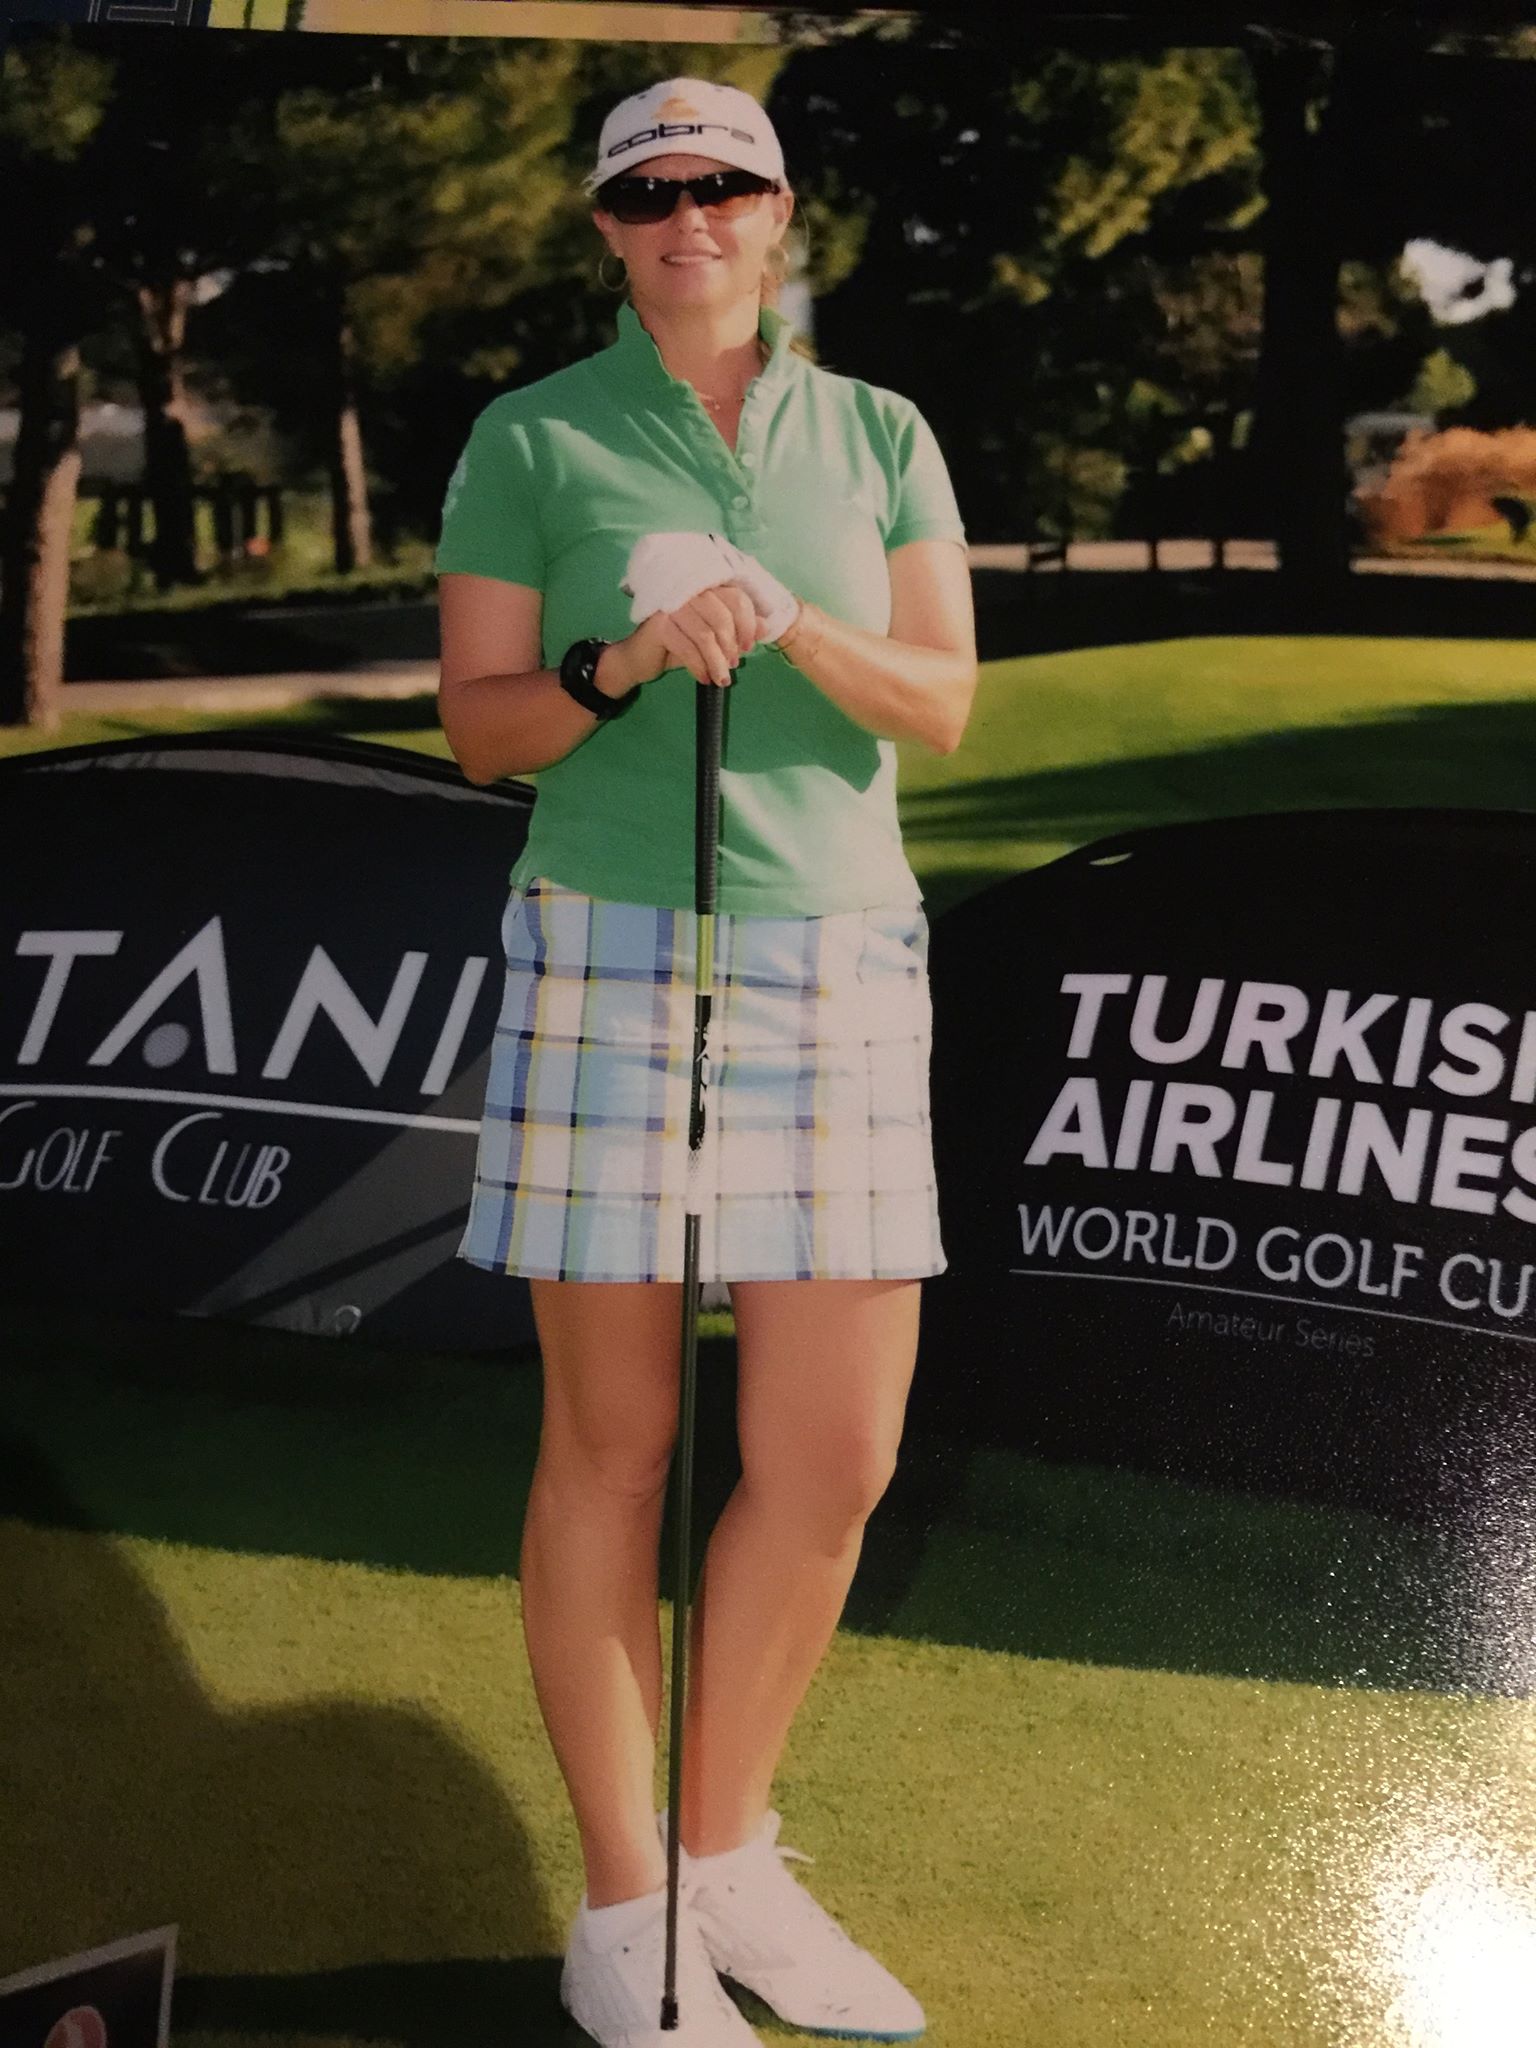 Andrea Ortiz Ozi é a primeira entre as mulheres do Turkish Airlines World Golf Cup 2016